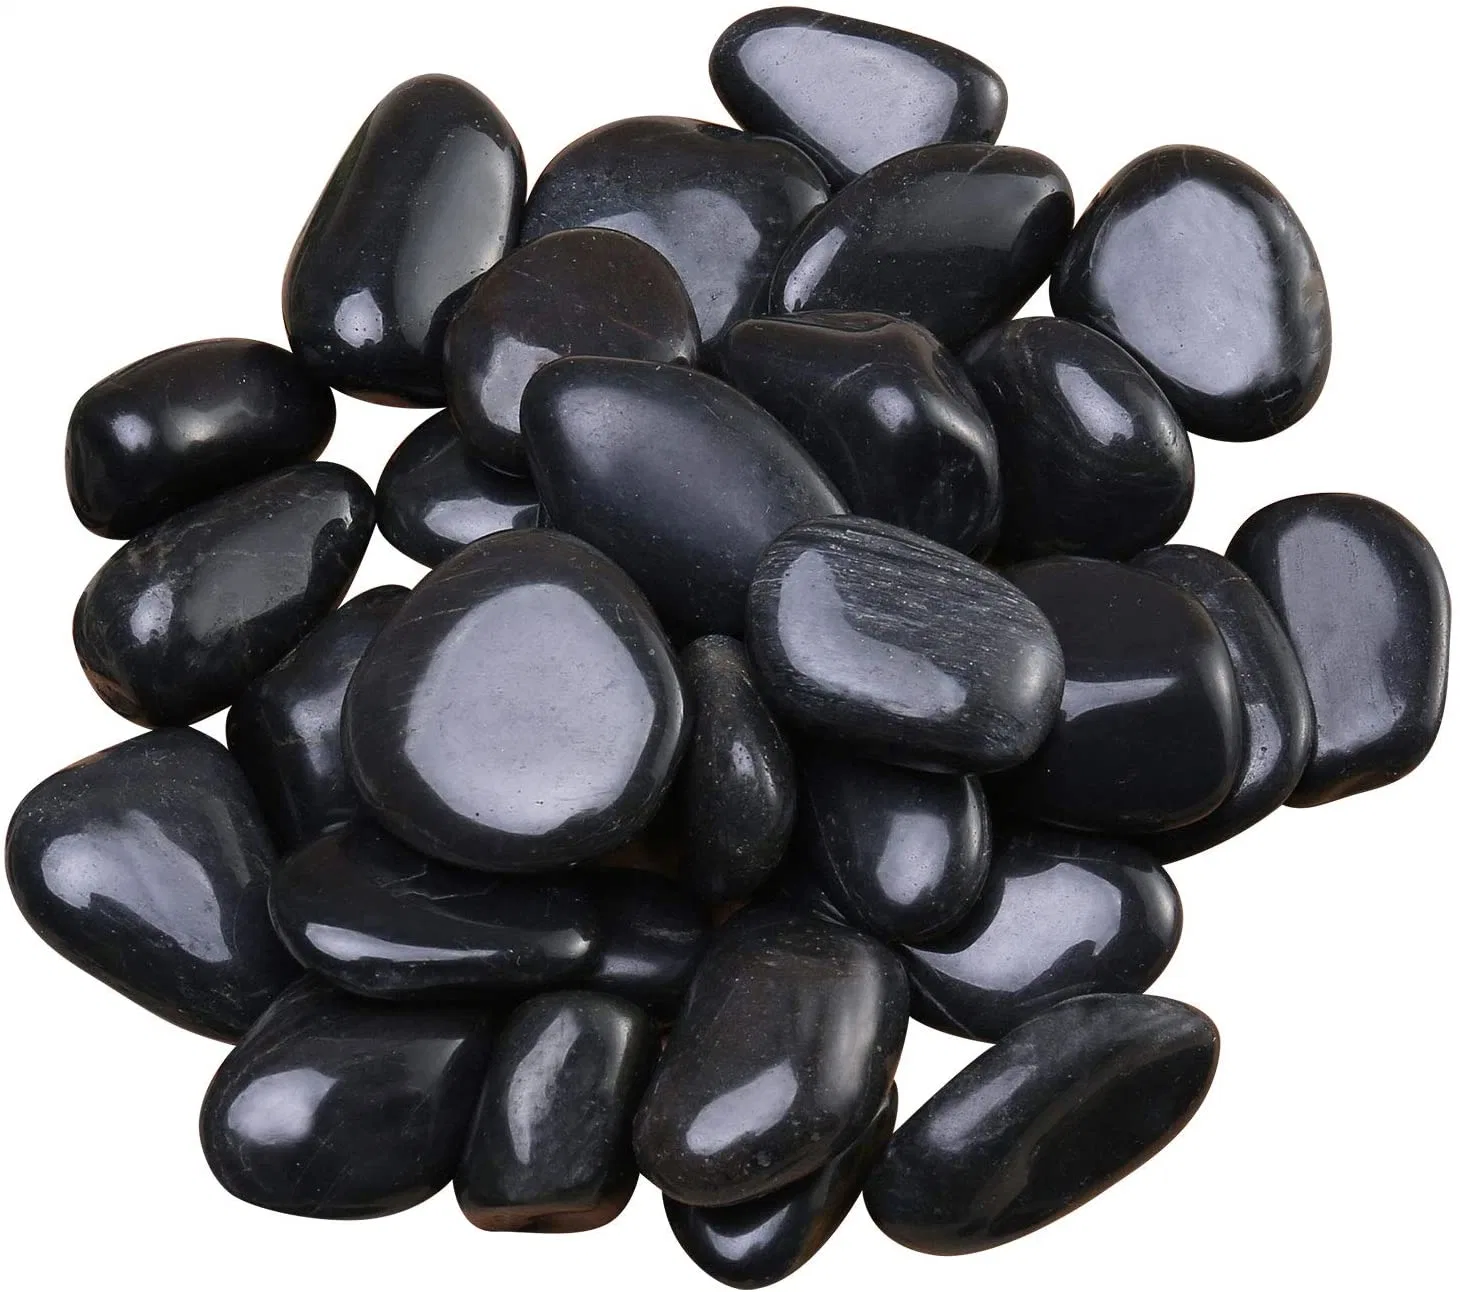 High Polished Black Pebbles Suitable for Outdoors and Indoors.